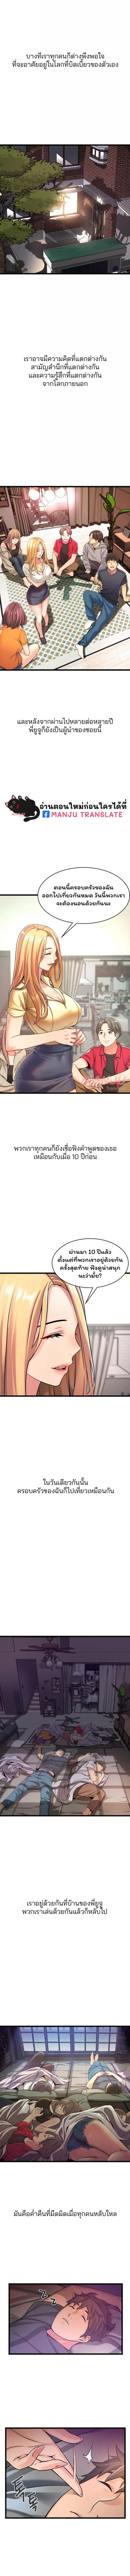 An Alley Story 1 ภาพที่ 11